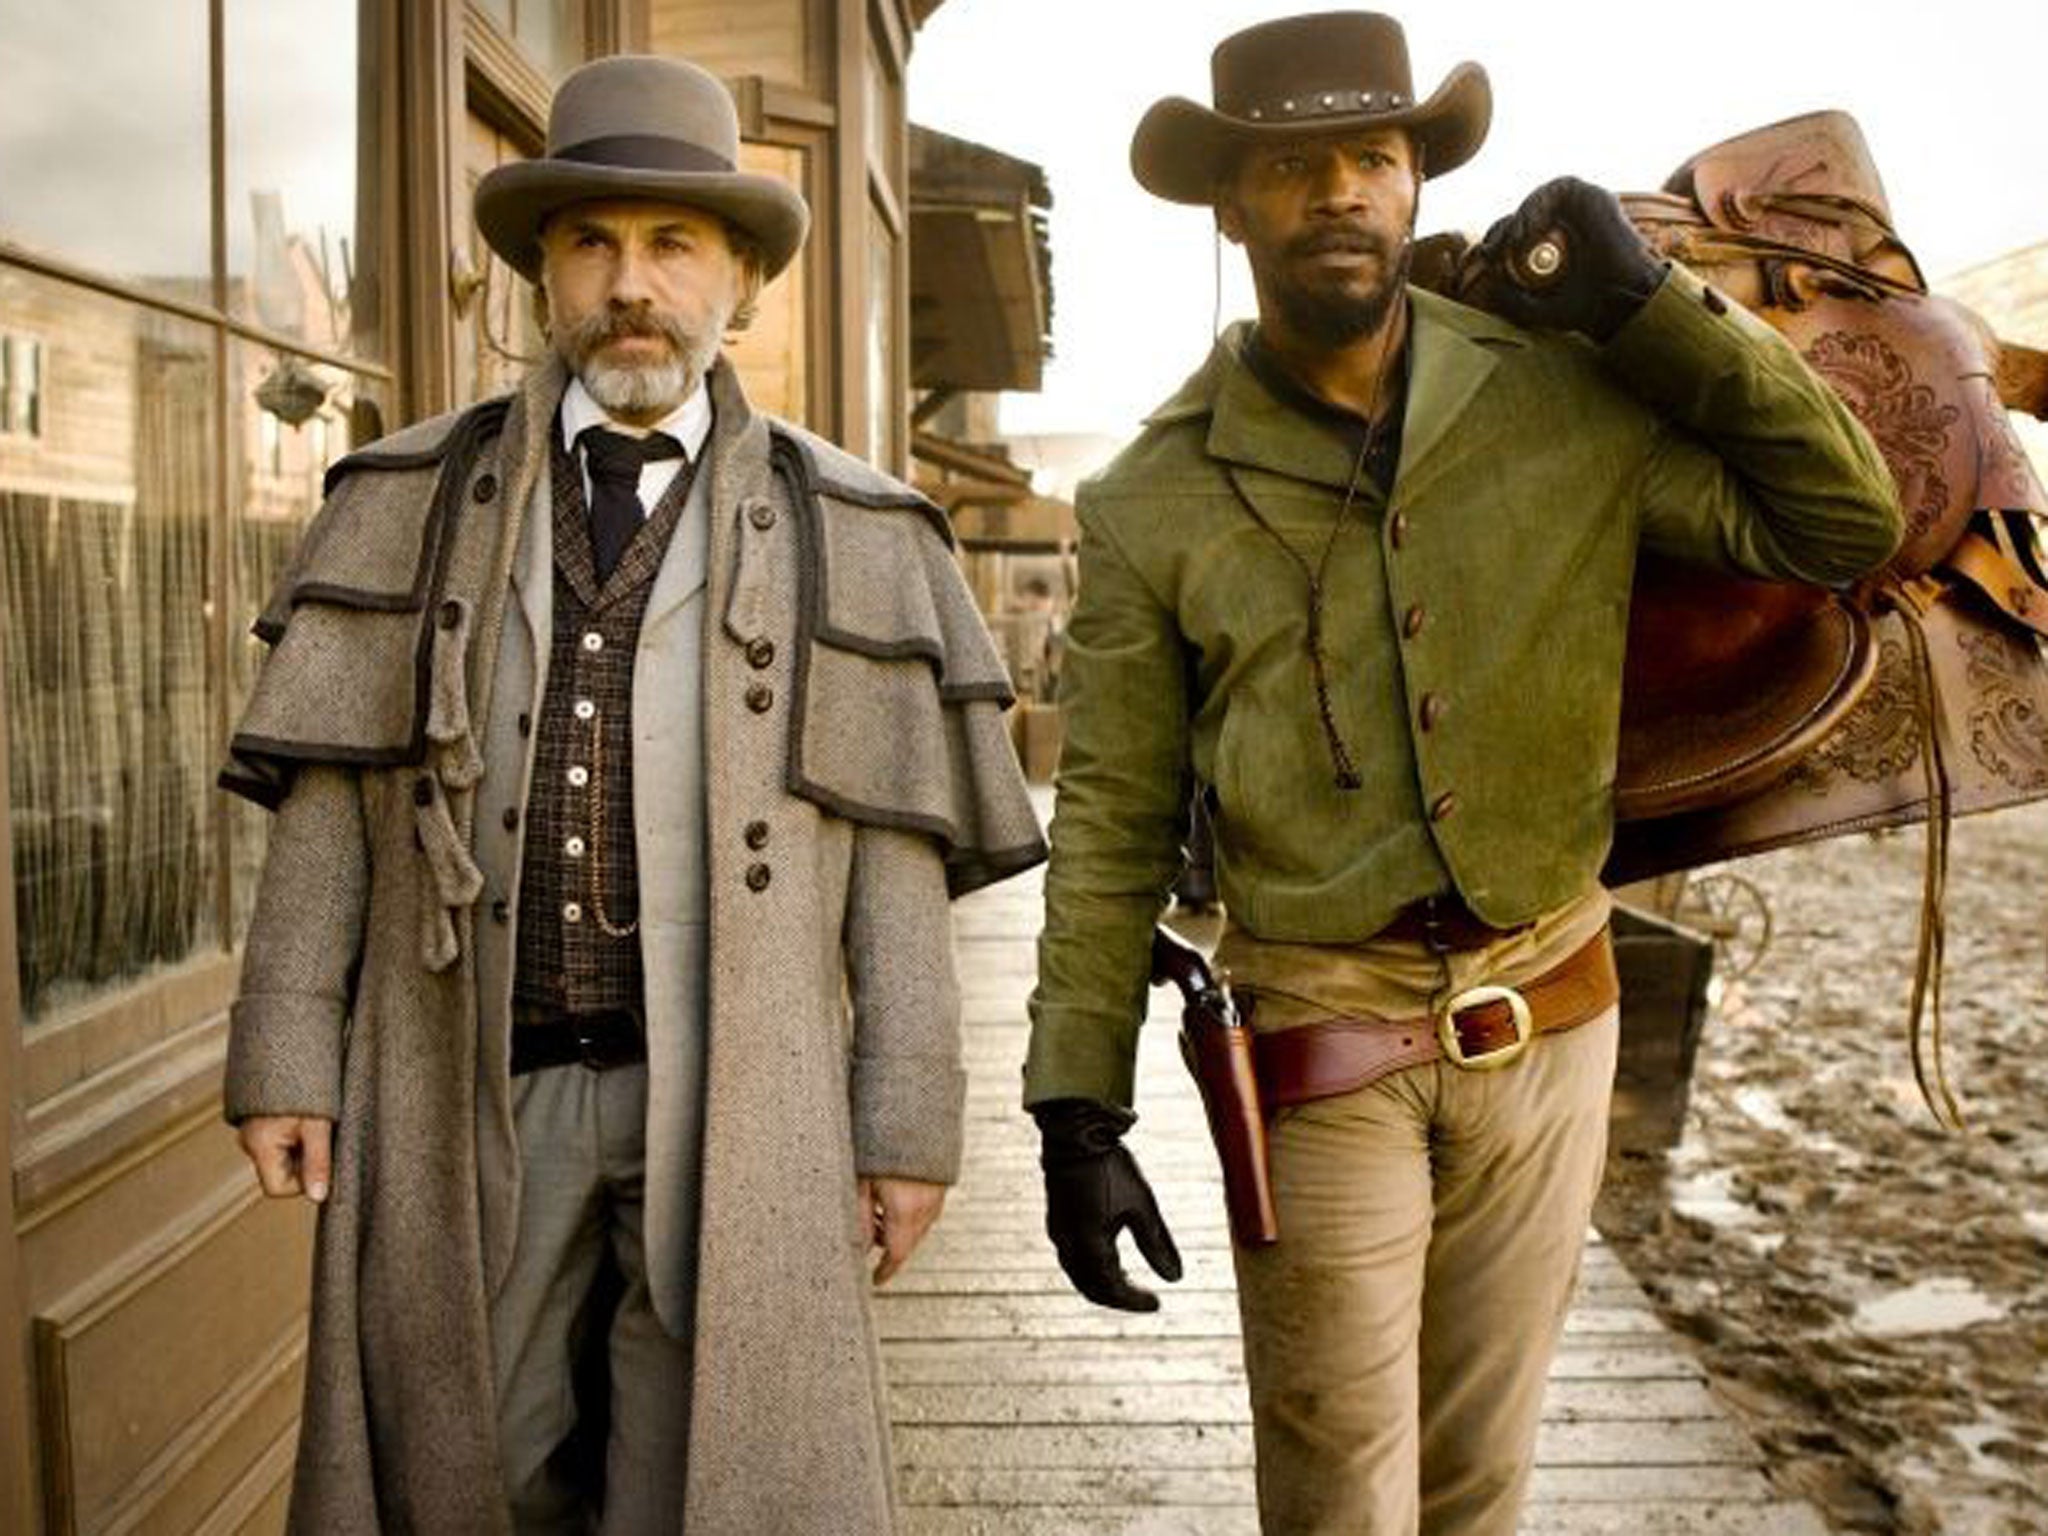 Django Unchained was a box office hit